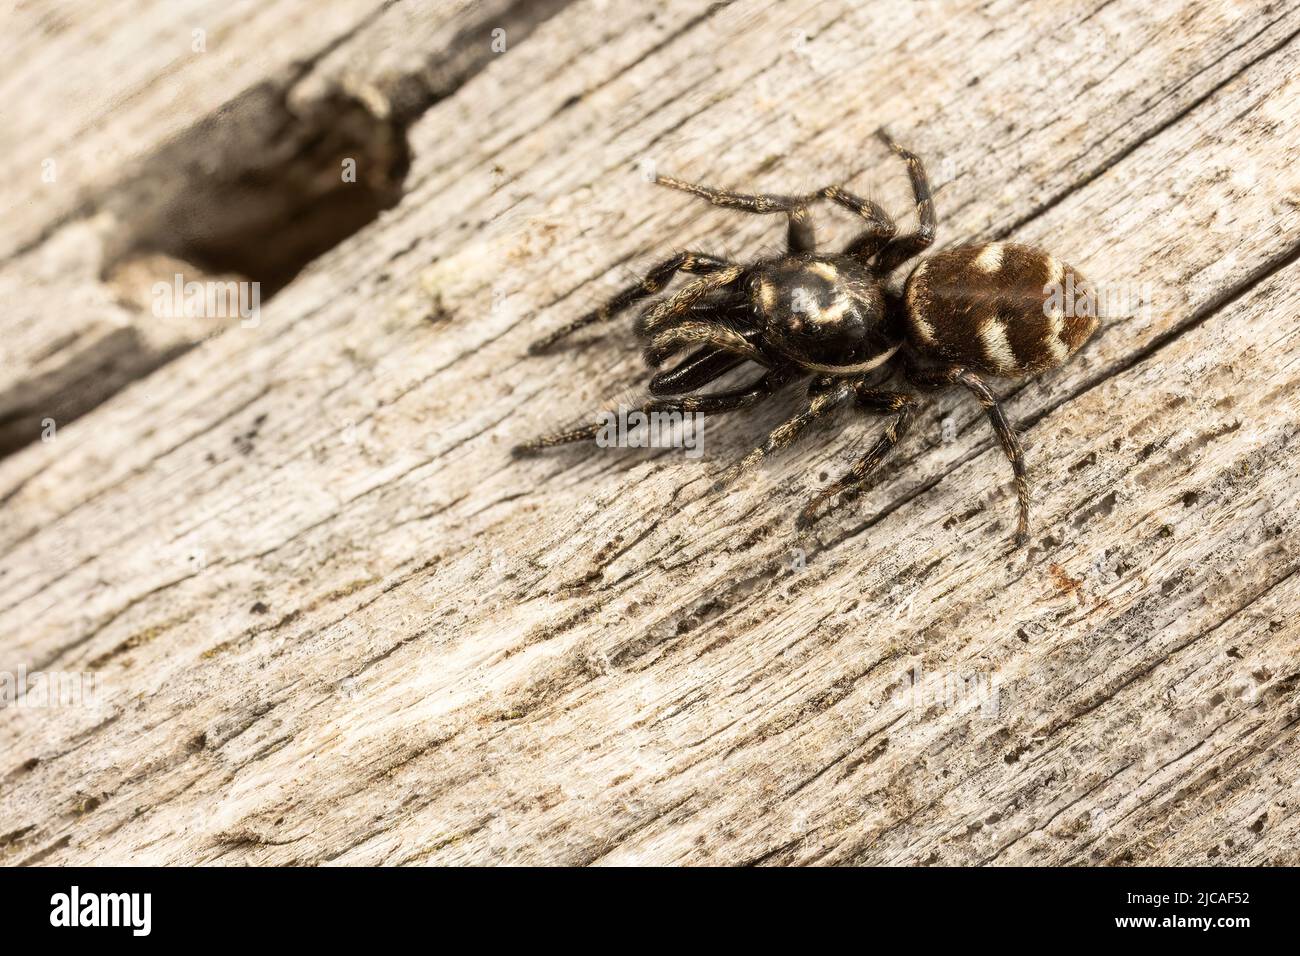 Male jumping spider with huge jaws. Stock Photo